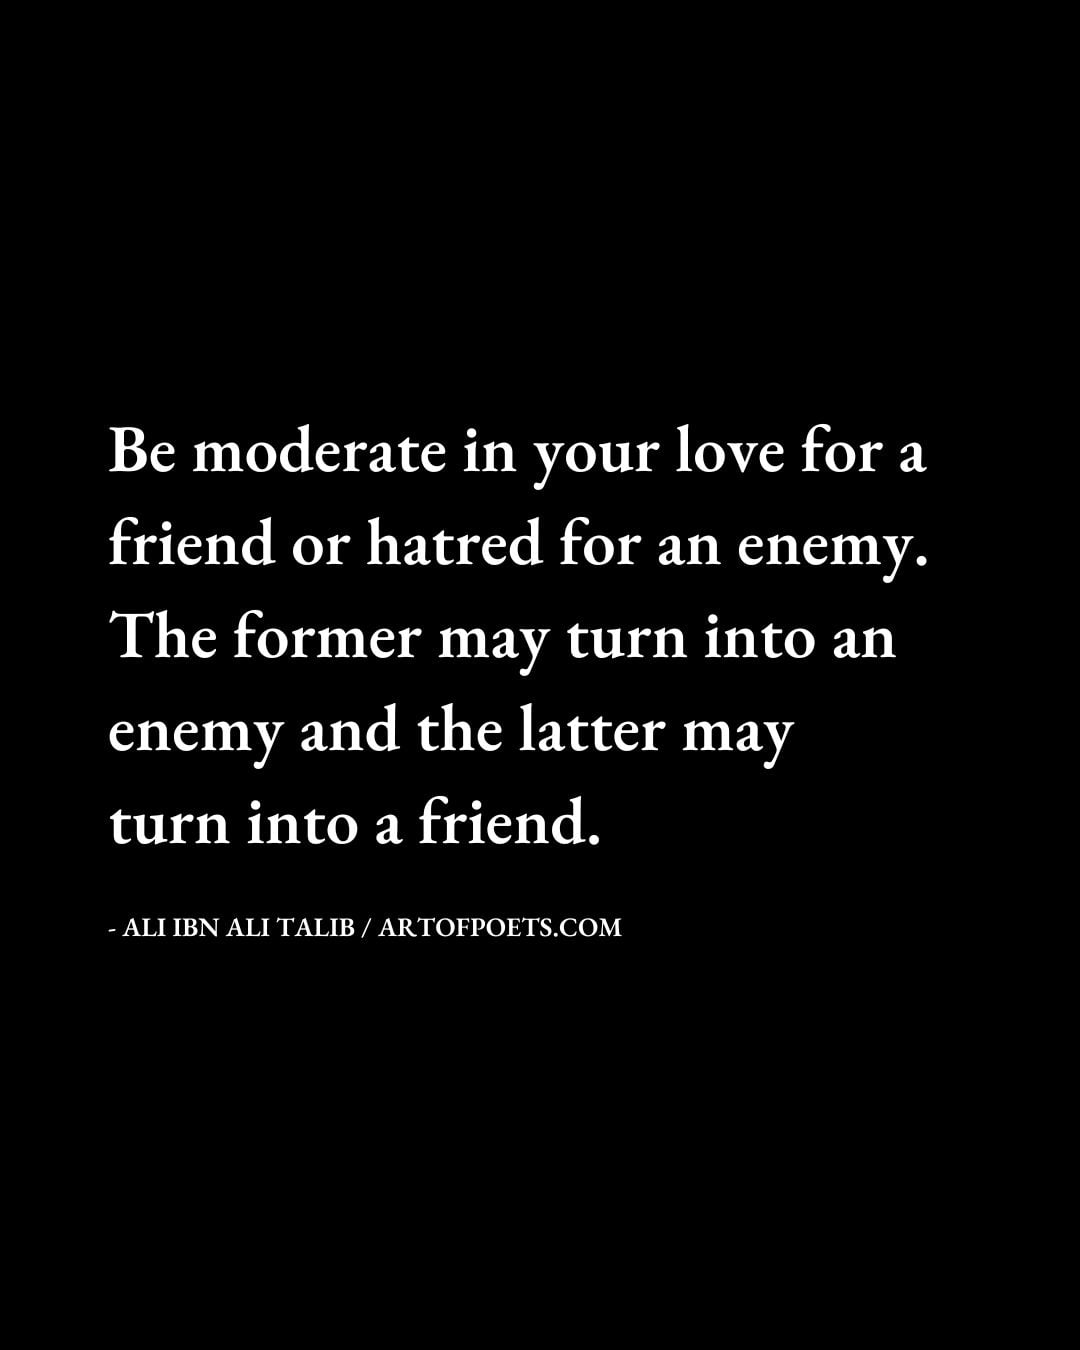 Be moderate in your love for a friend or hatred for an enemy. The former may turn into an enemy and the latter may turn into a friend